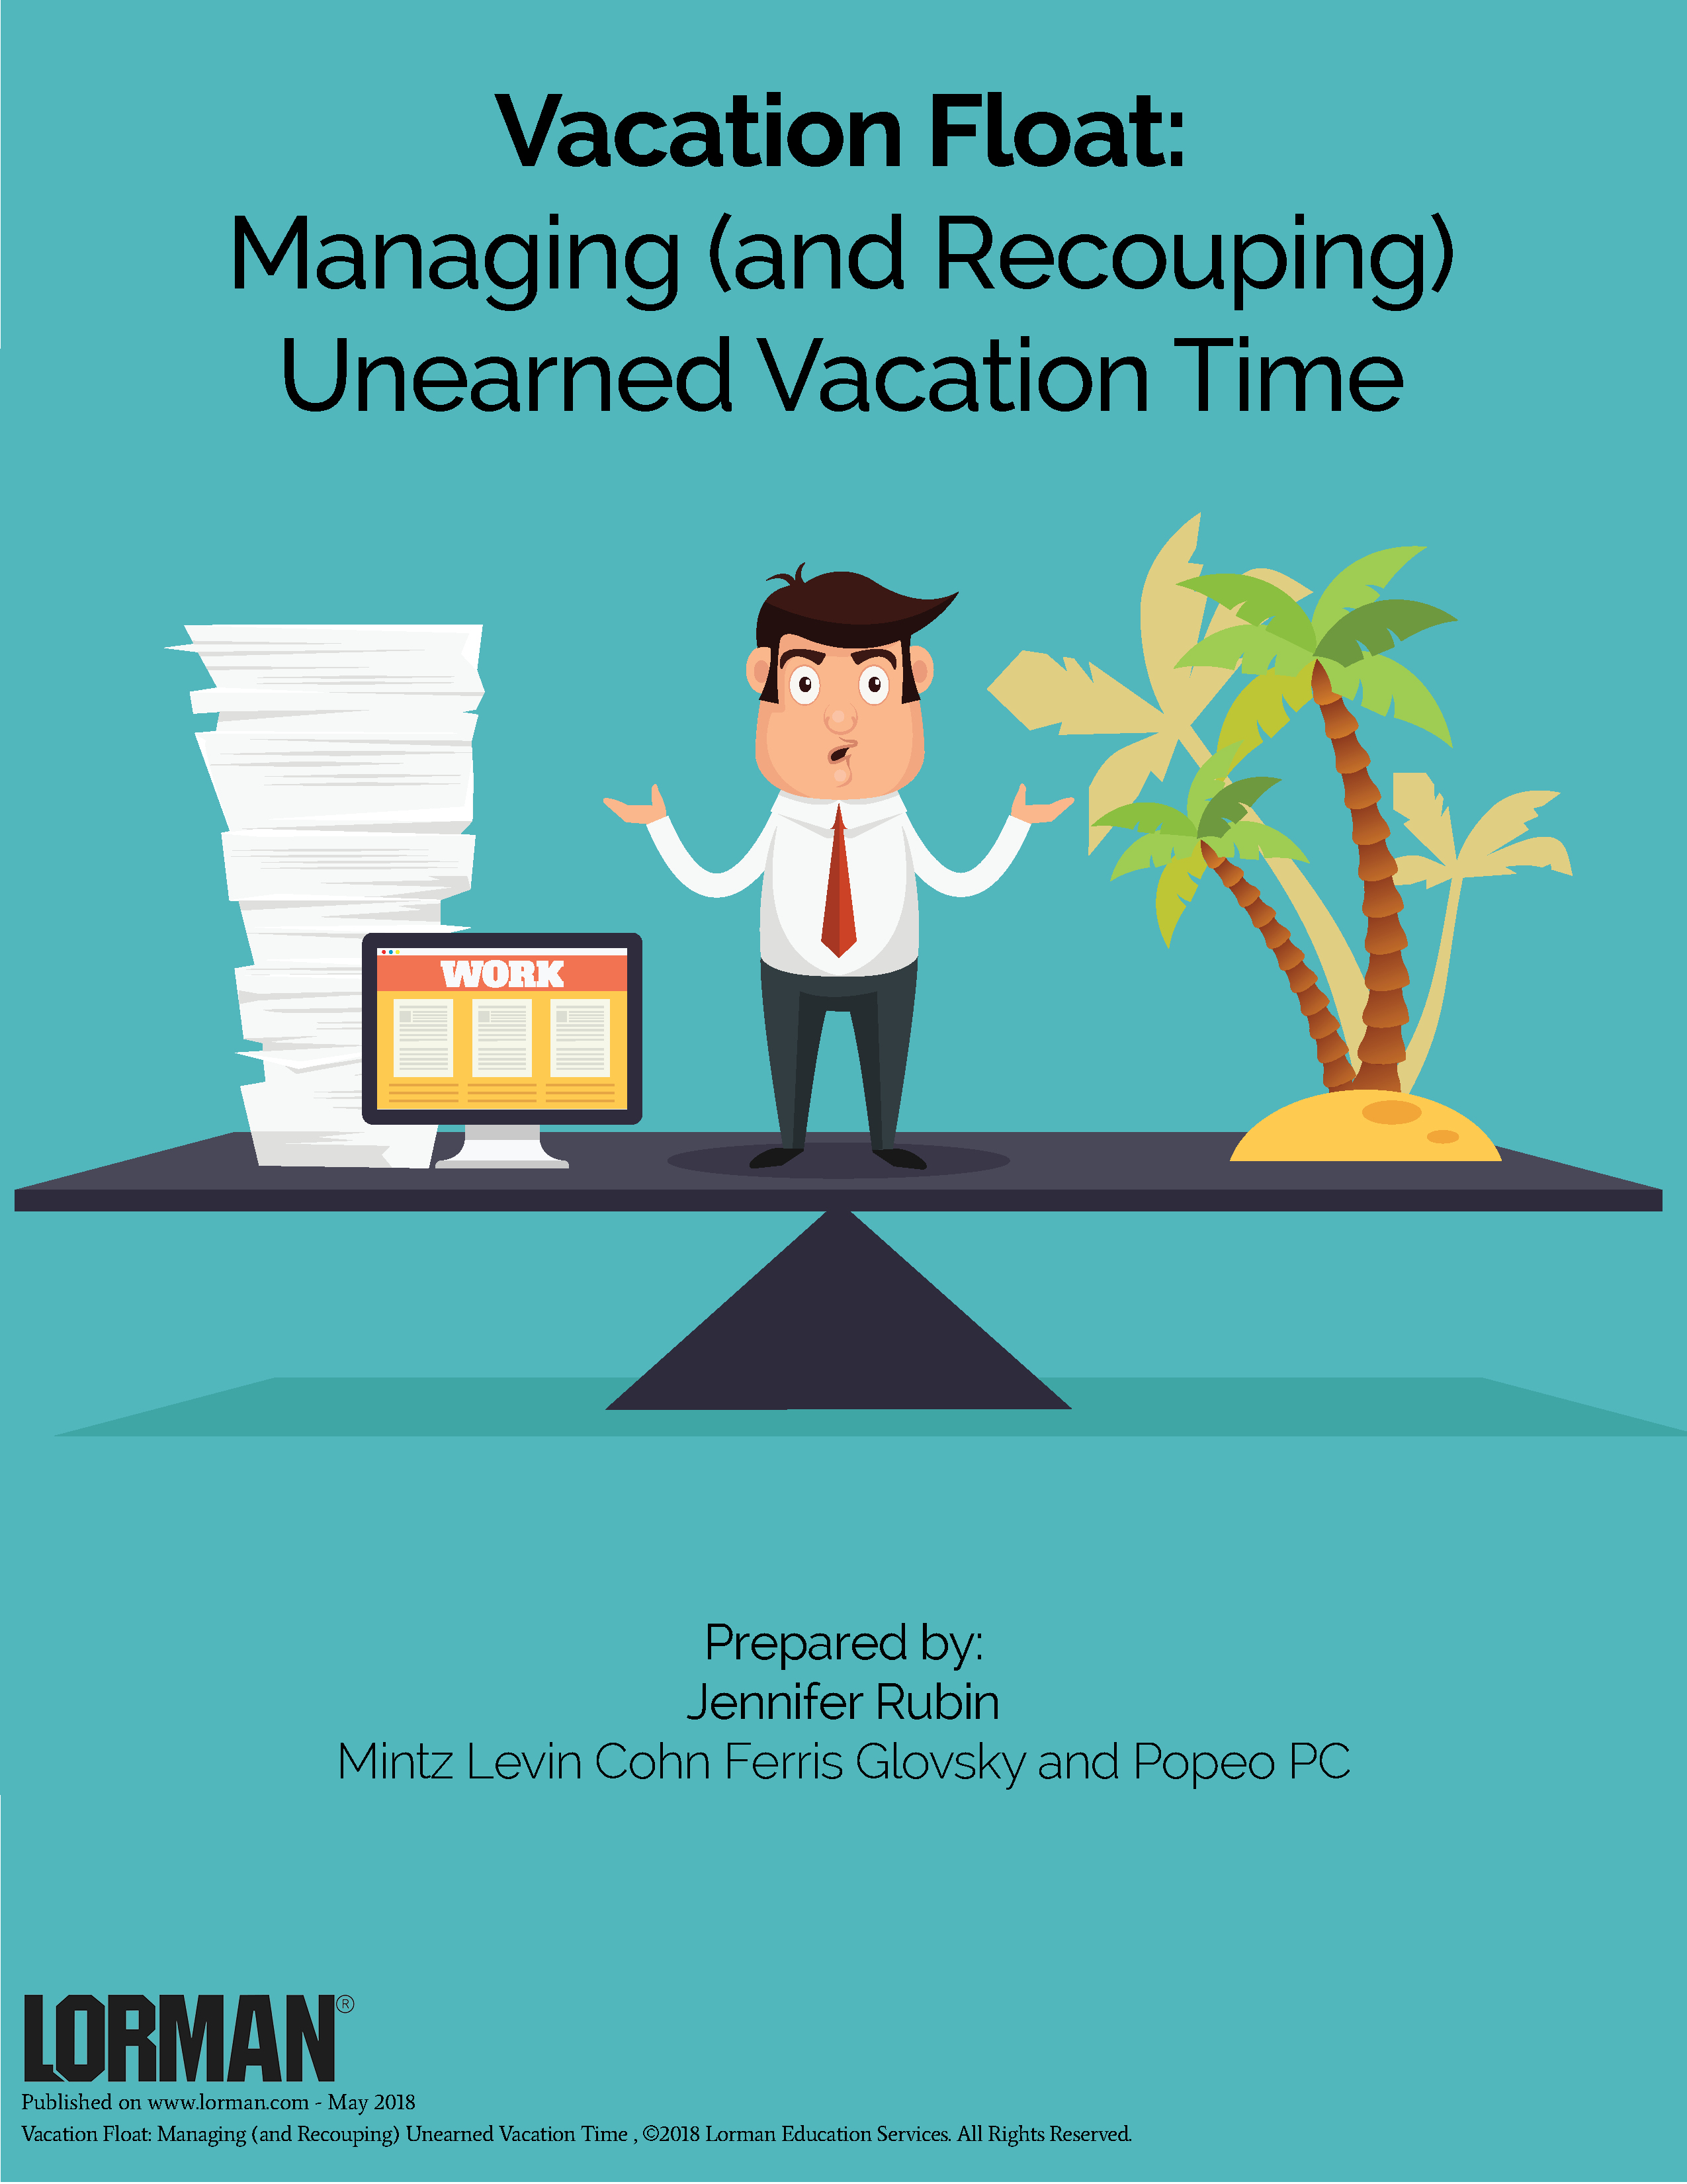 Vacation Float: Managing (and Recouping) Unearned Vacation Time